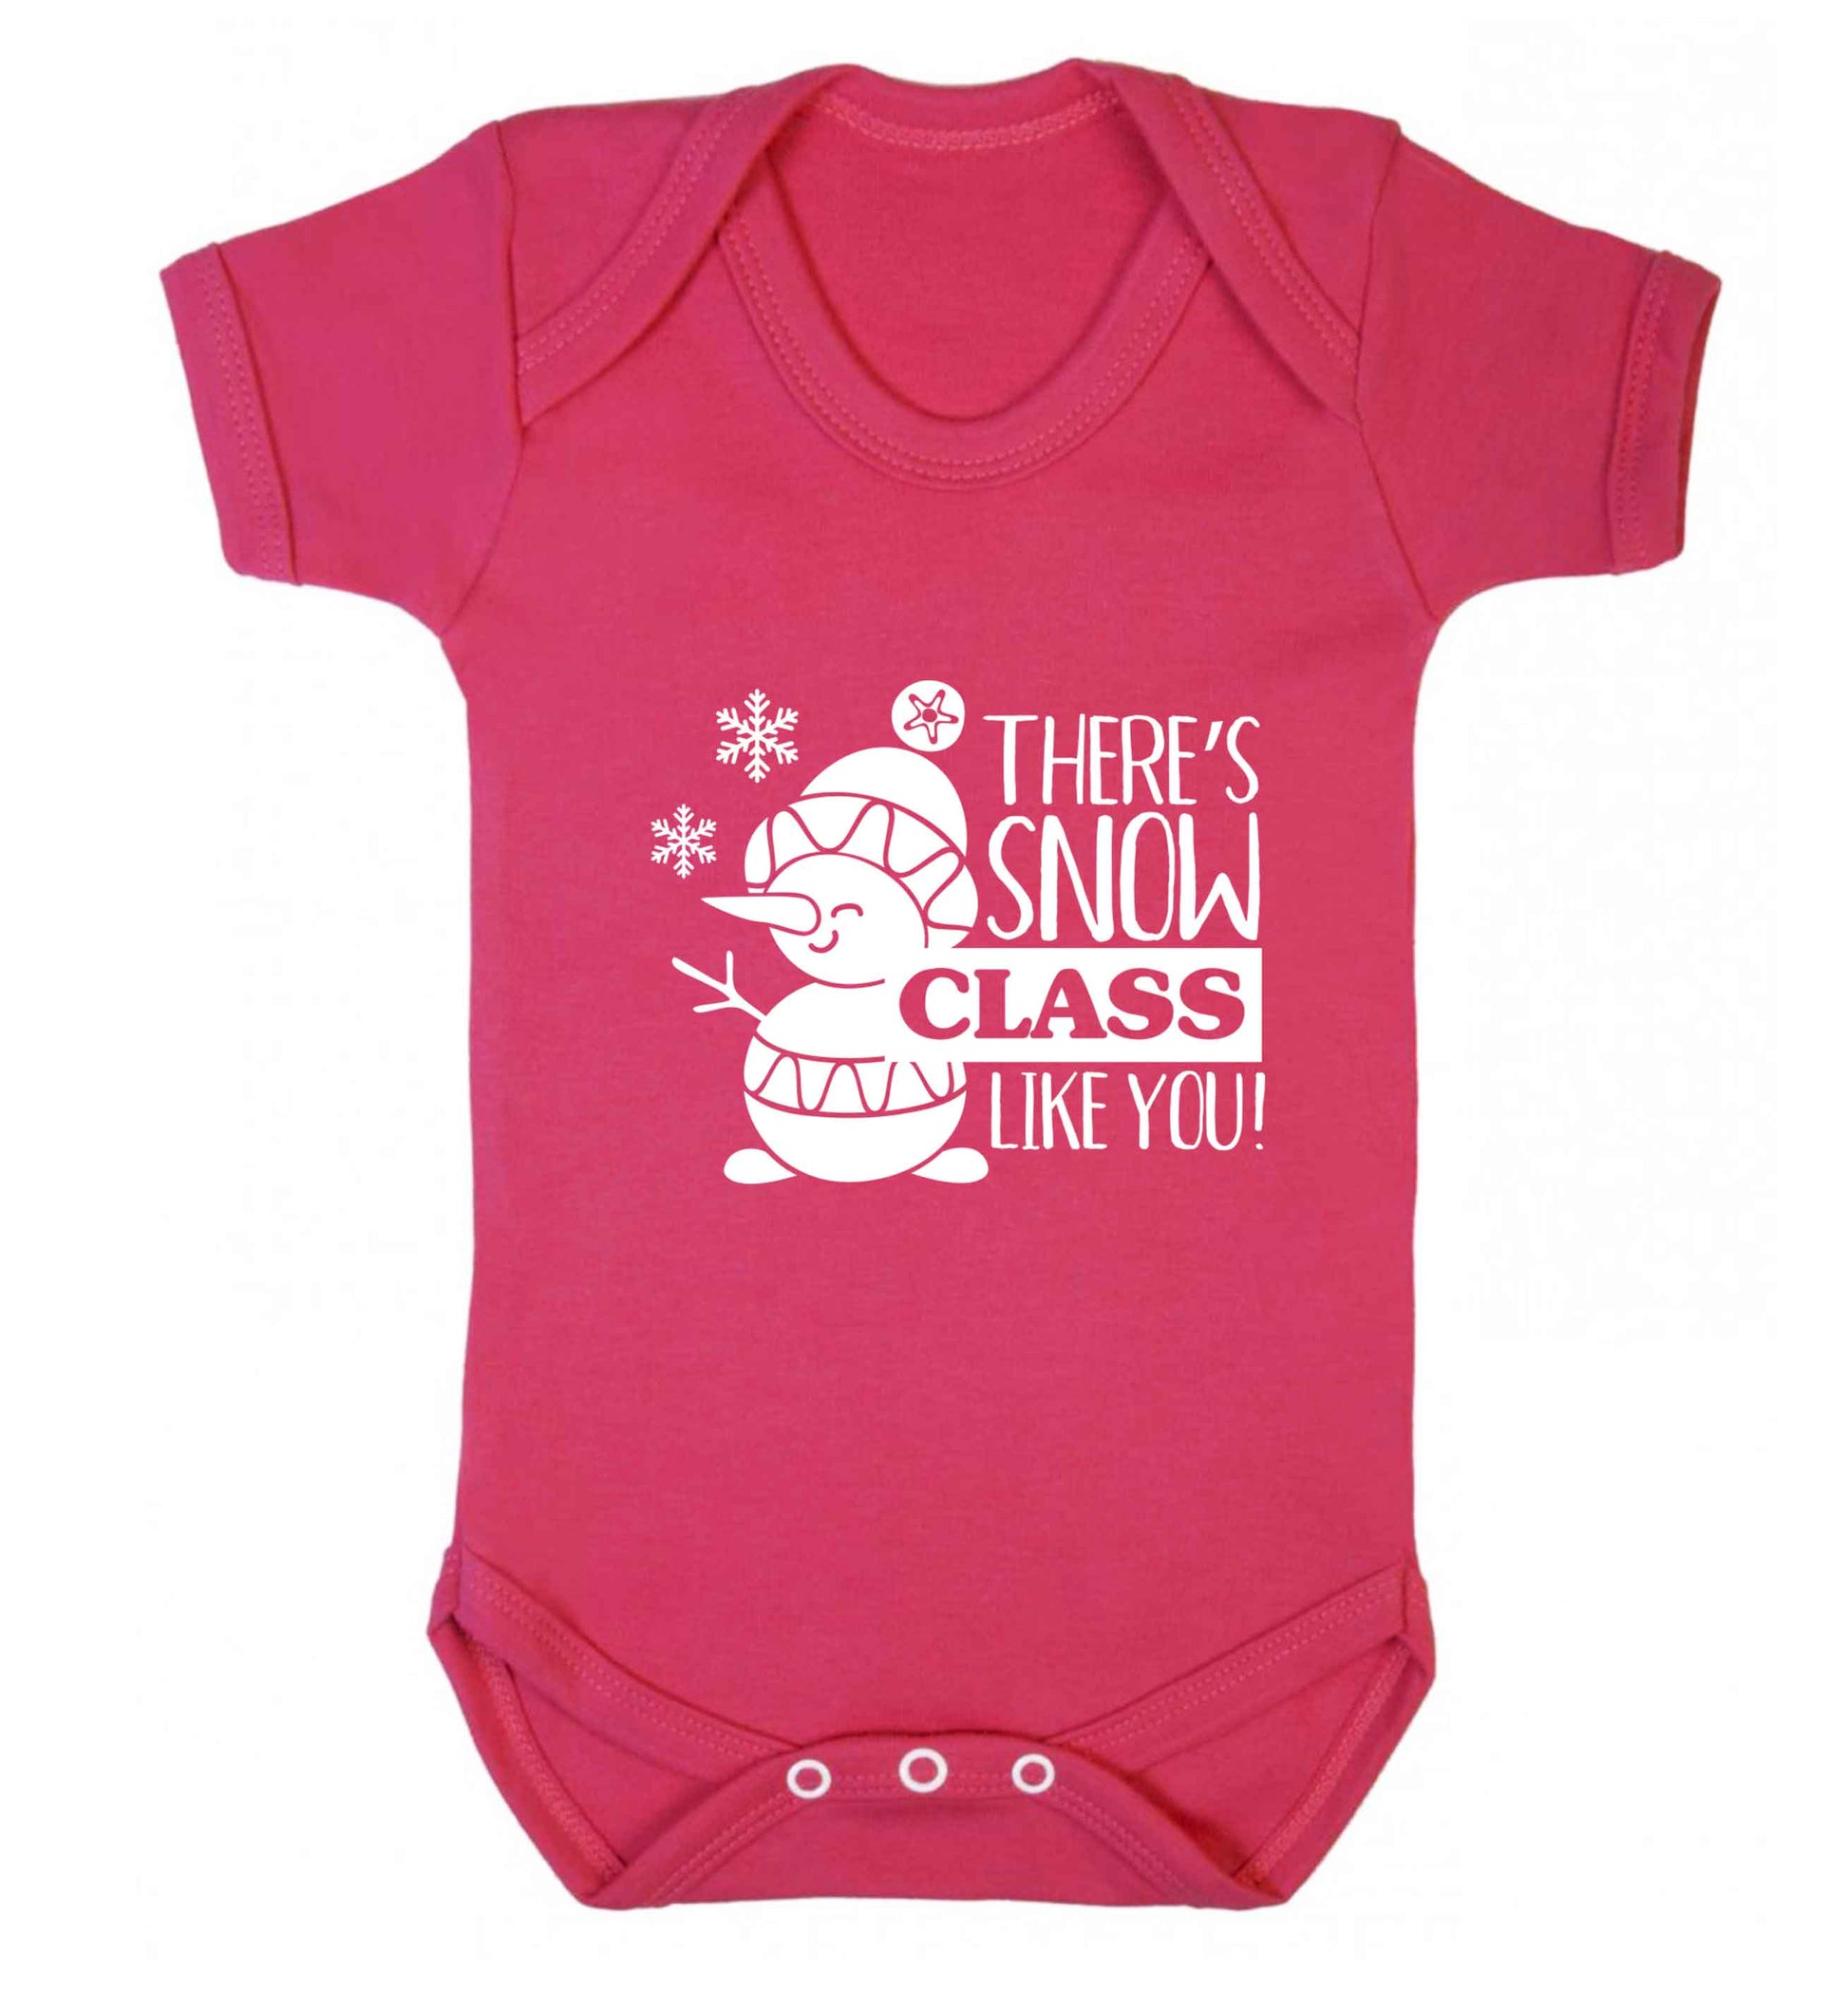 There's snow class like you baby vest dark pink 18-24 months